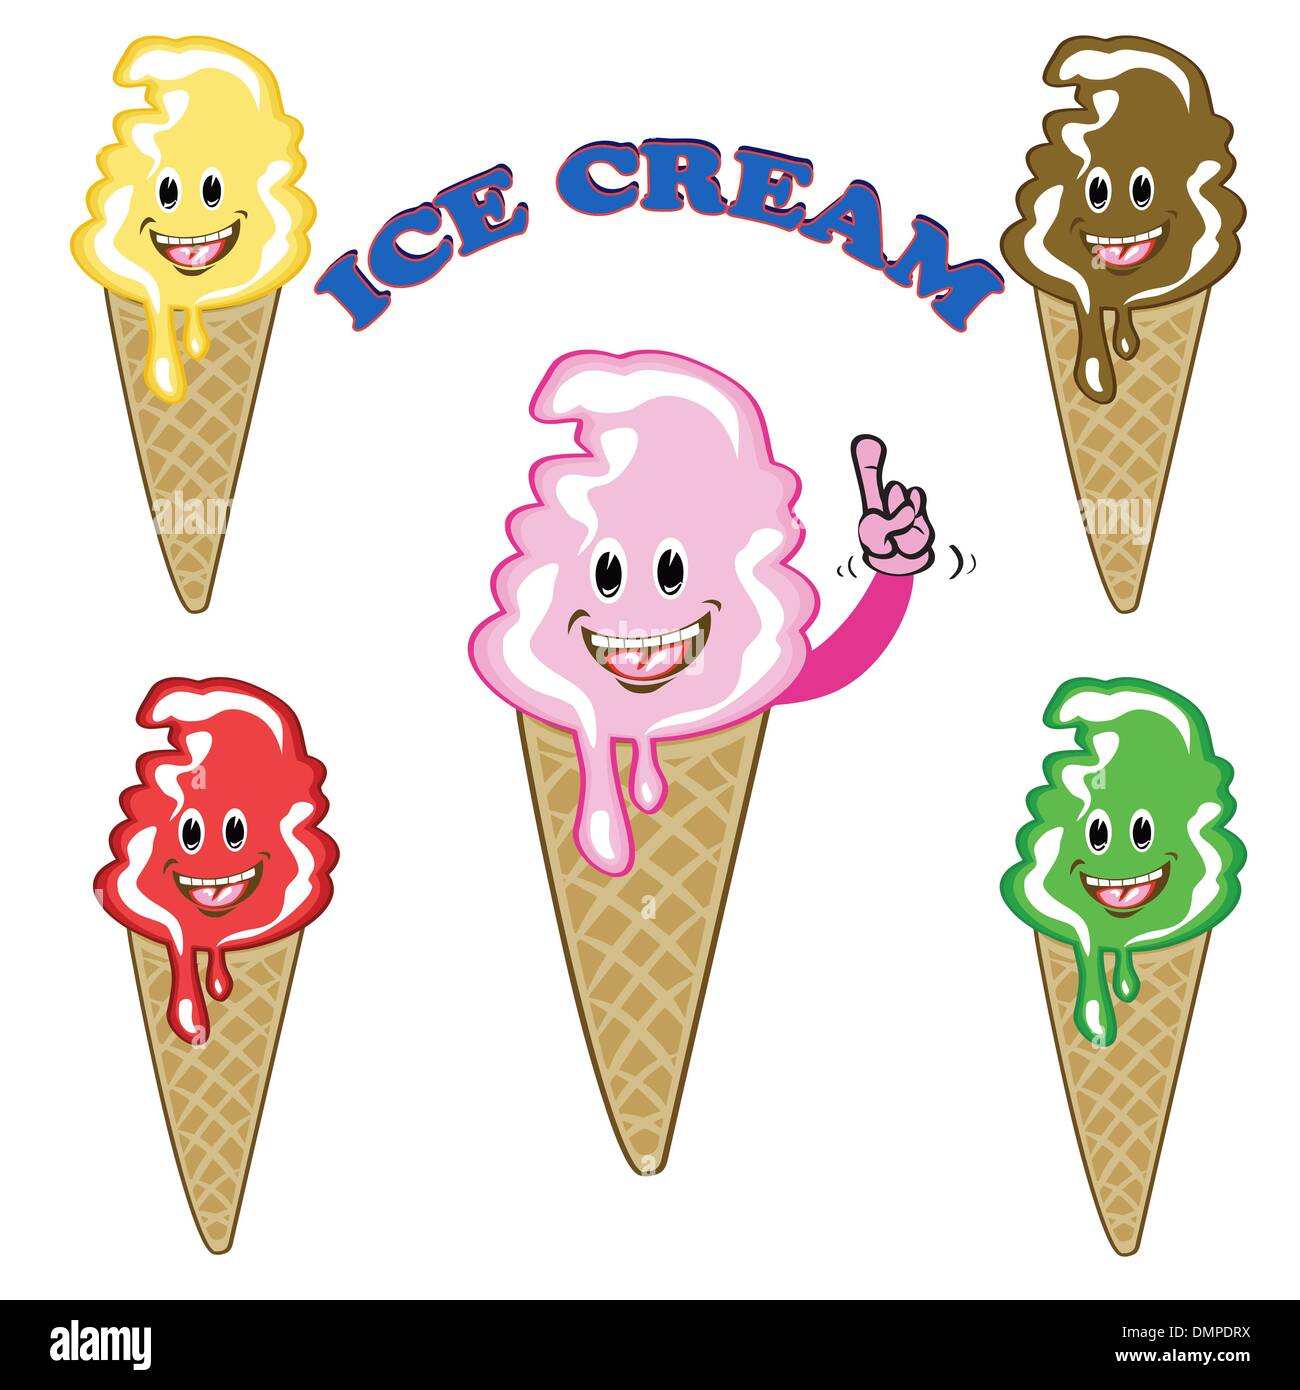 Ice Cream Hand Vector Art PNG, Ice Cream Showing Dislike Hand Sign, Fun, Bad,  Cartoon PNG Image For Free Download